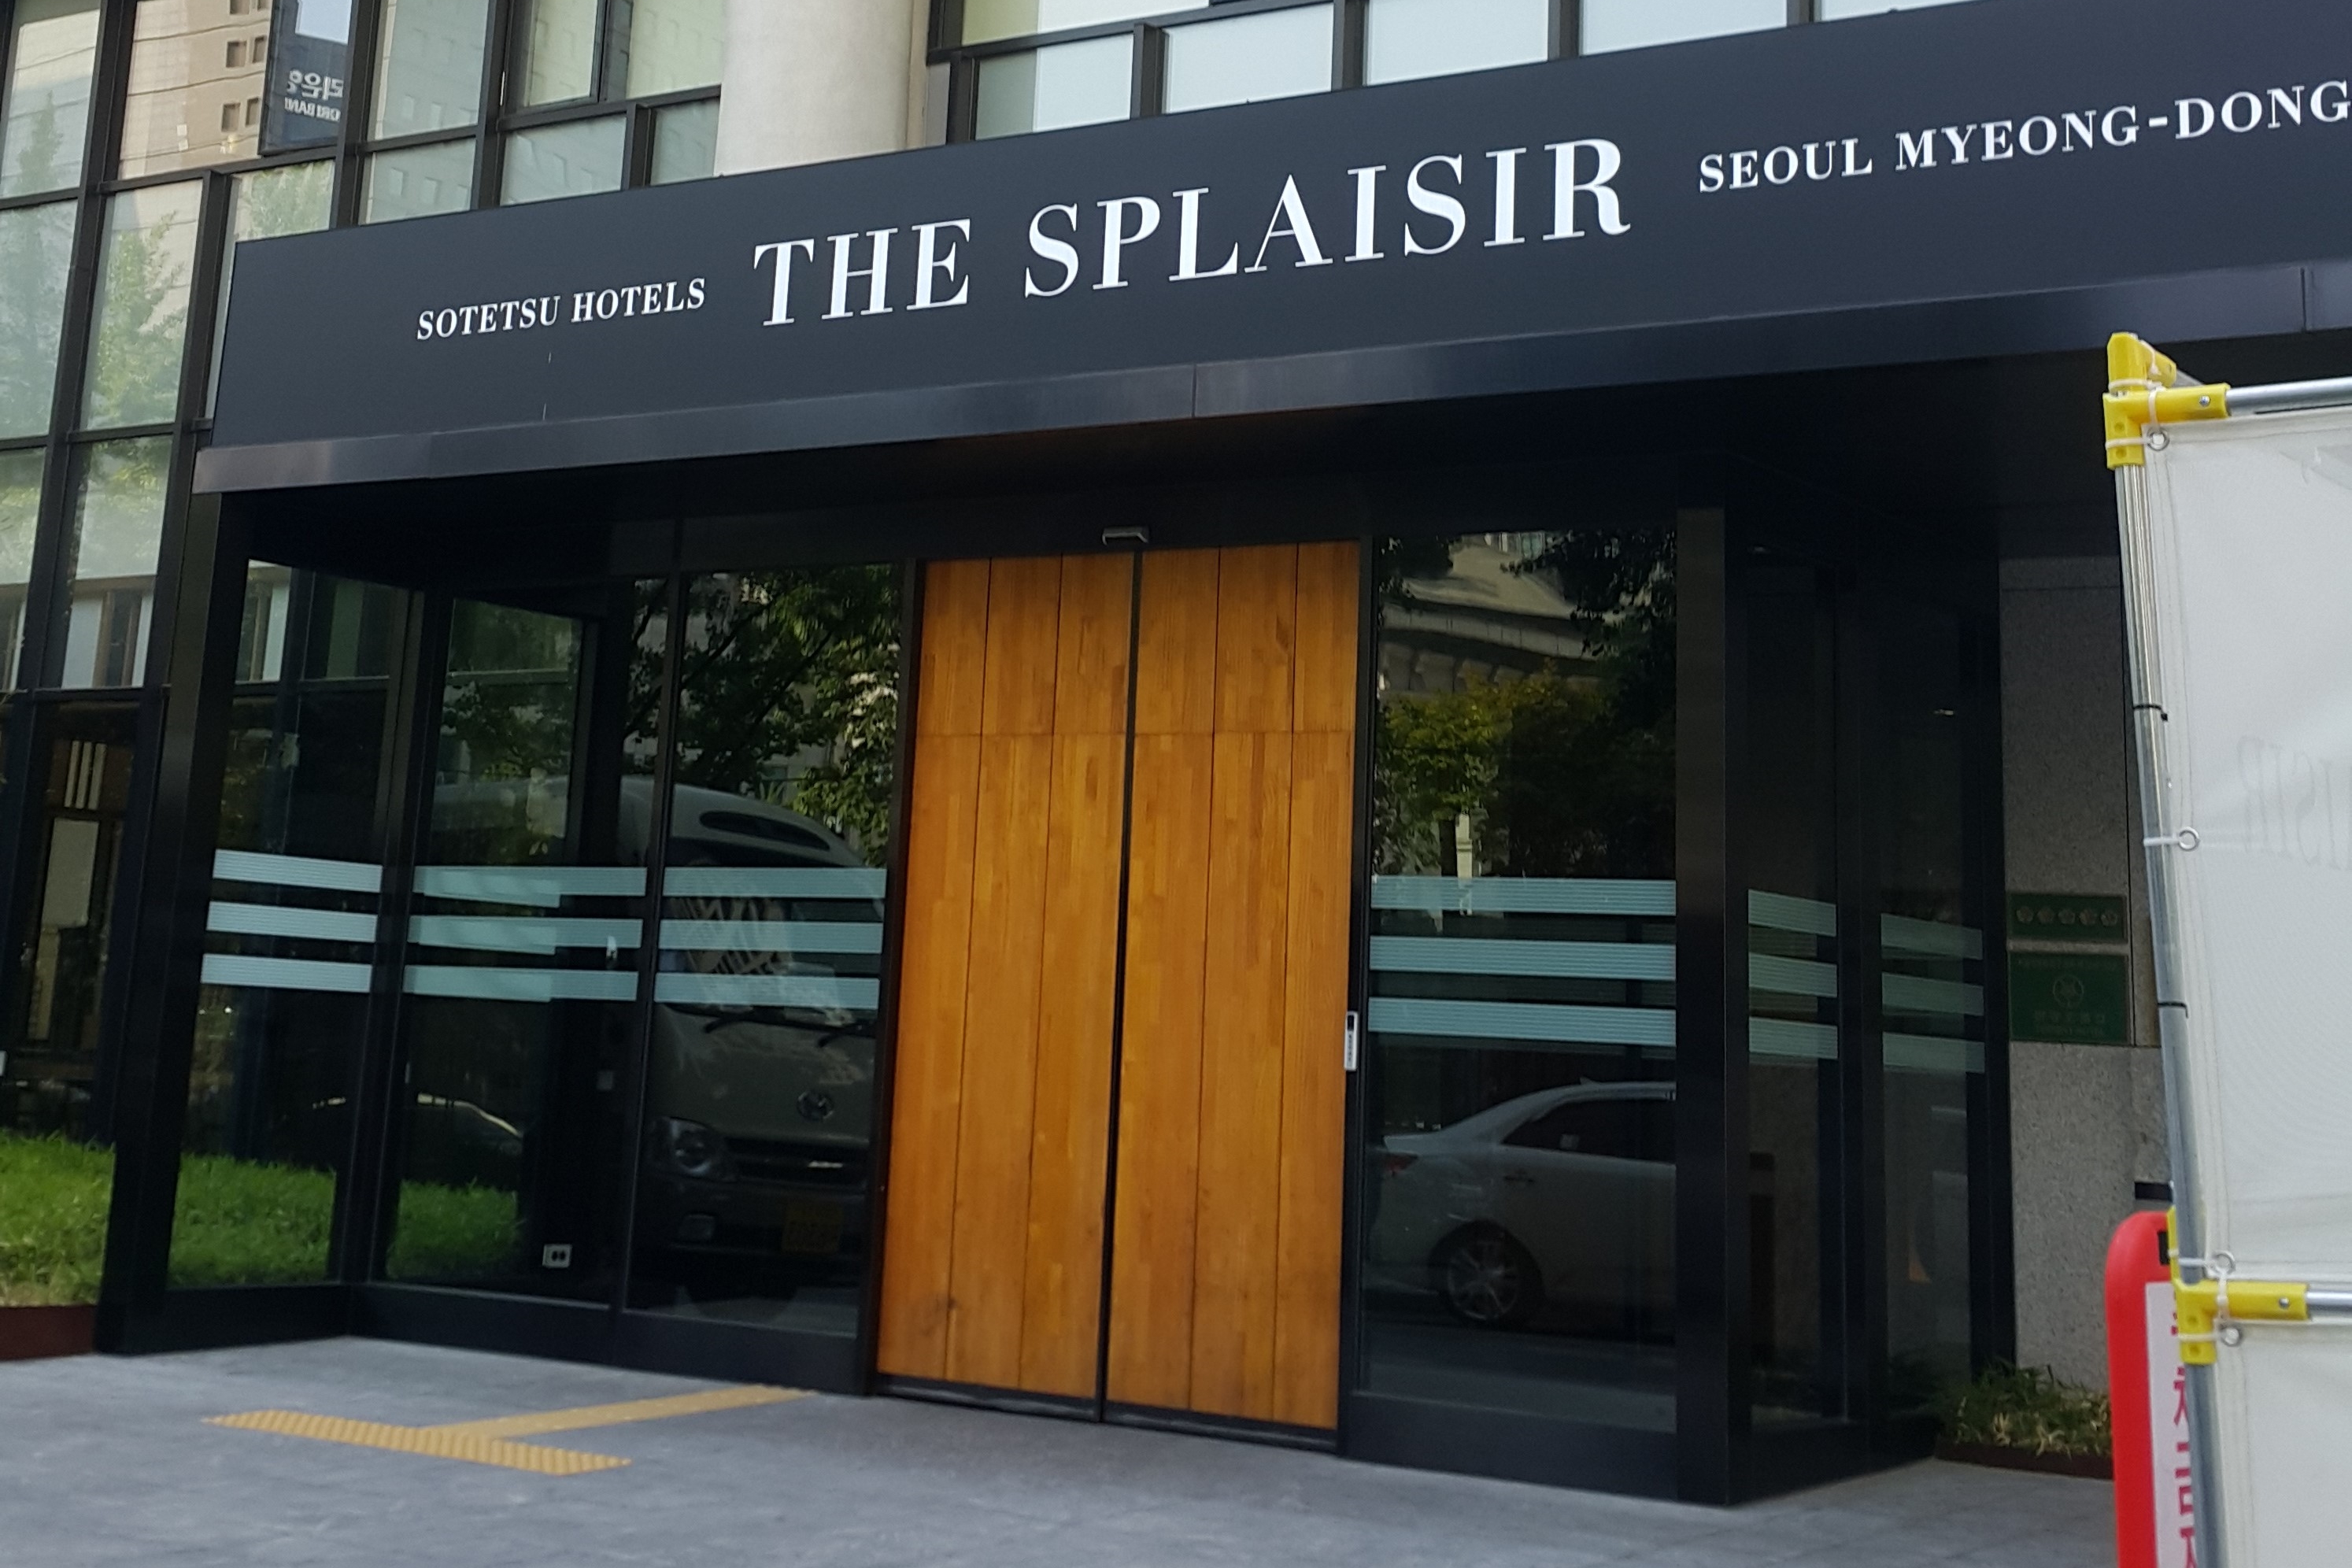 Main entrance0 : Room entrance of the Sotetsu Hotels The Splaisir Seoul Myeongdong with tactile flooring
